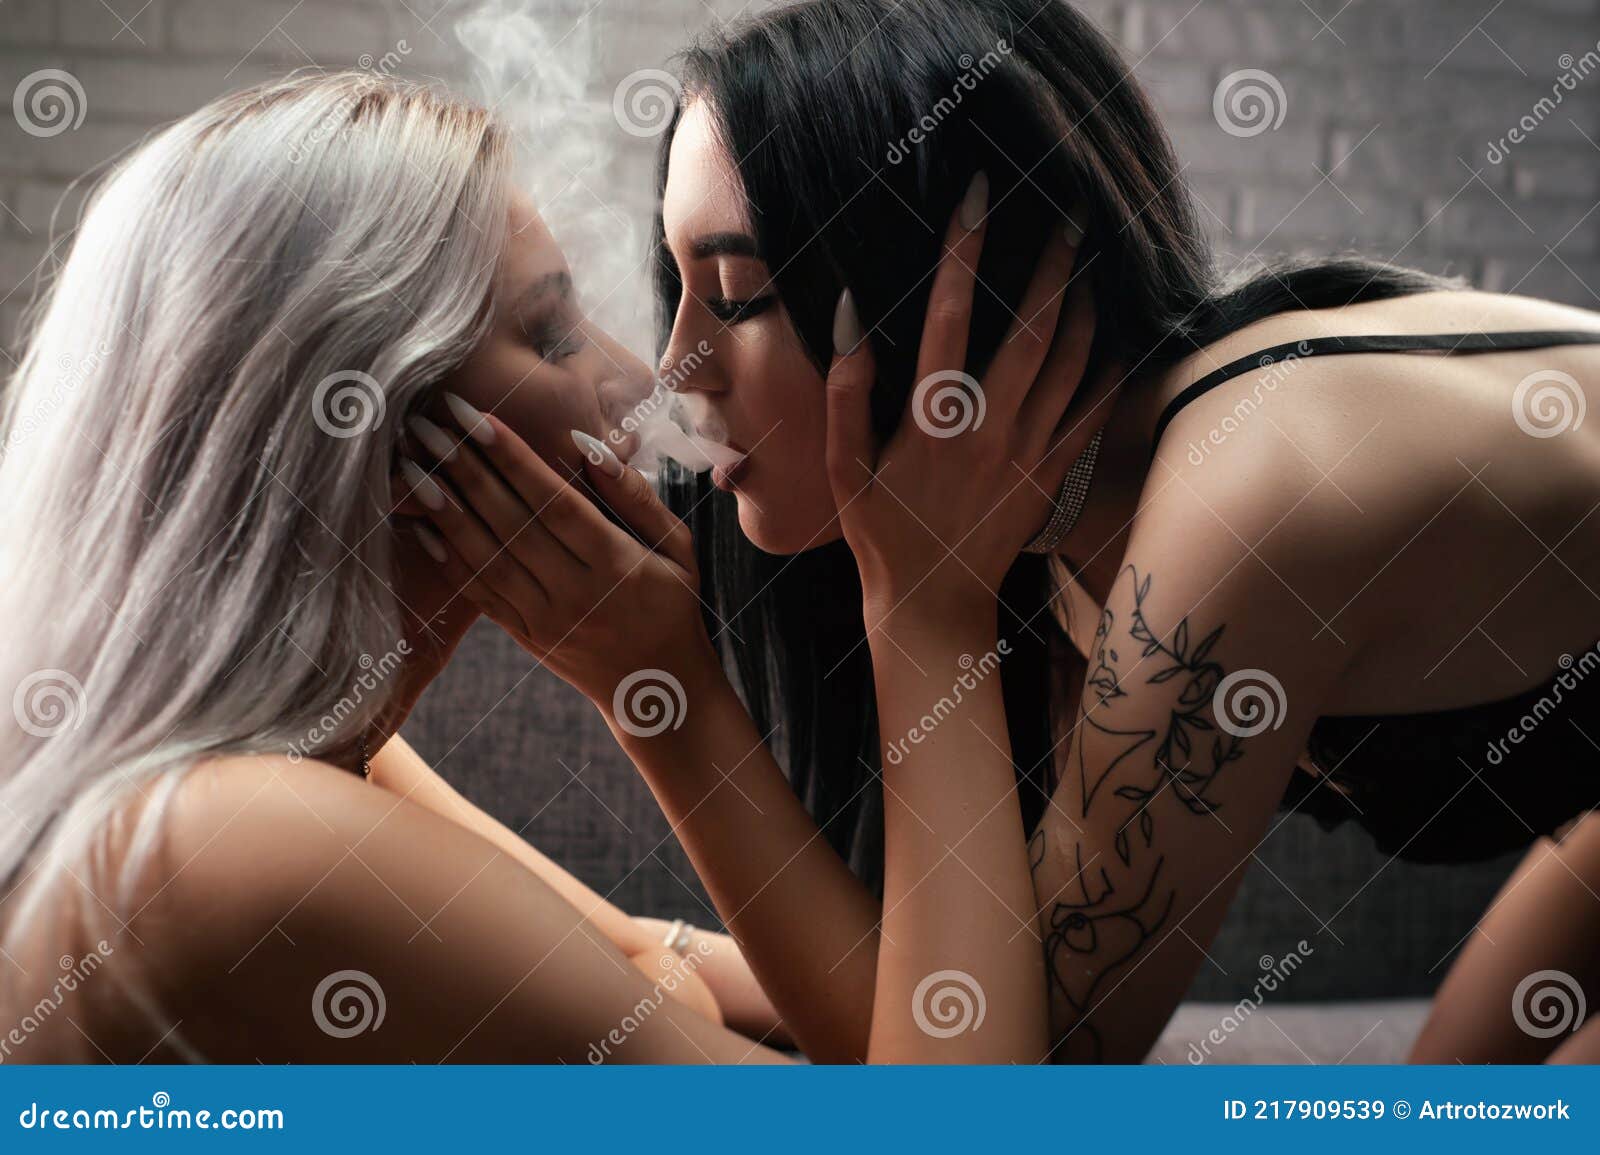 annette crosby share two woman making out photos